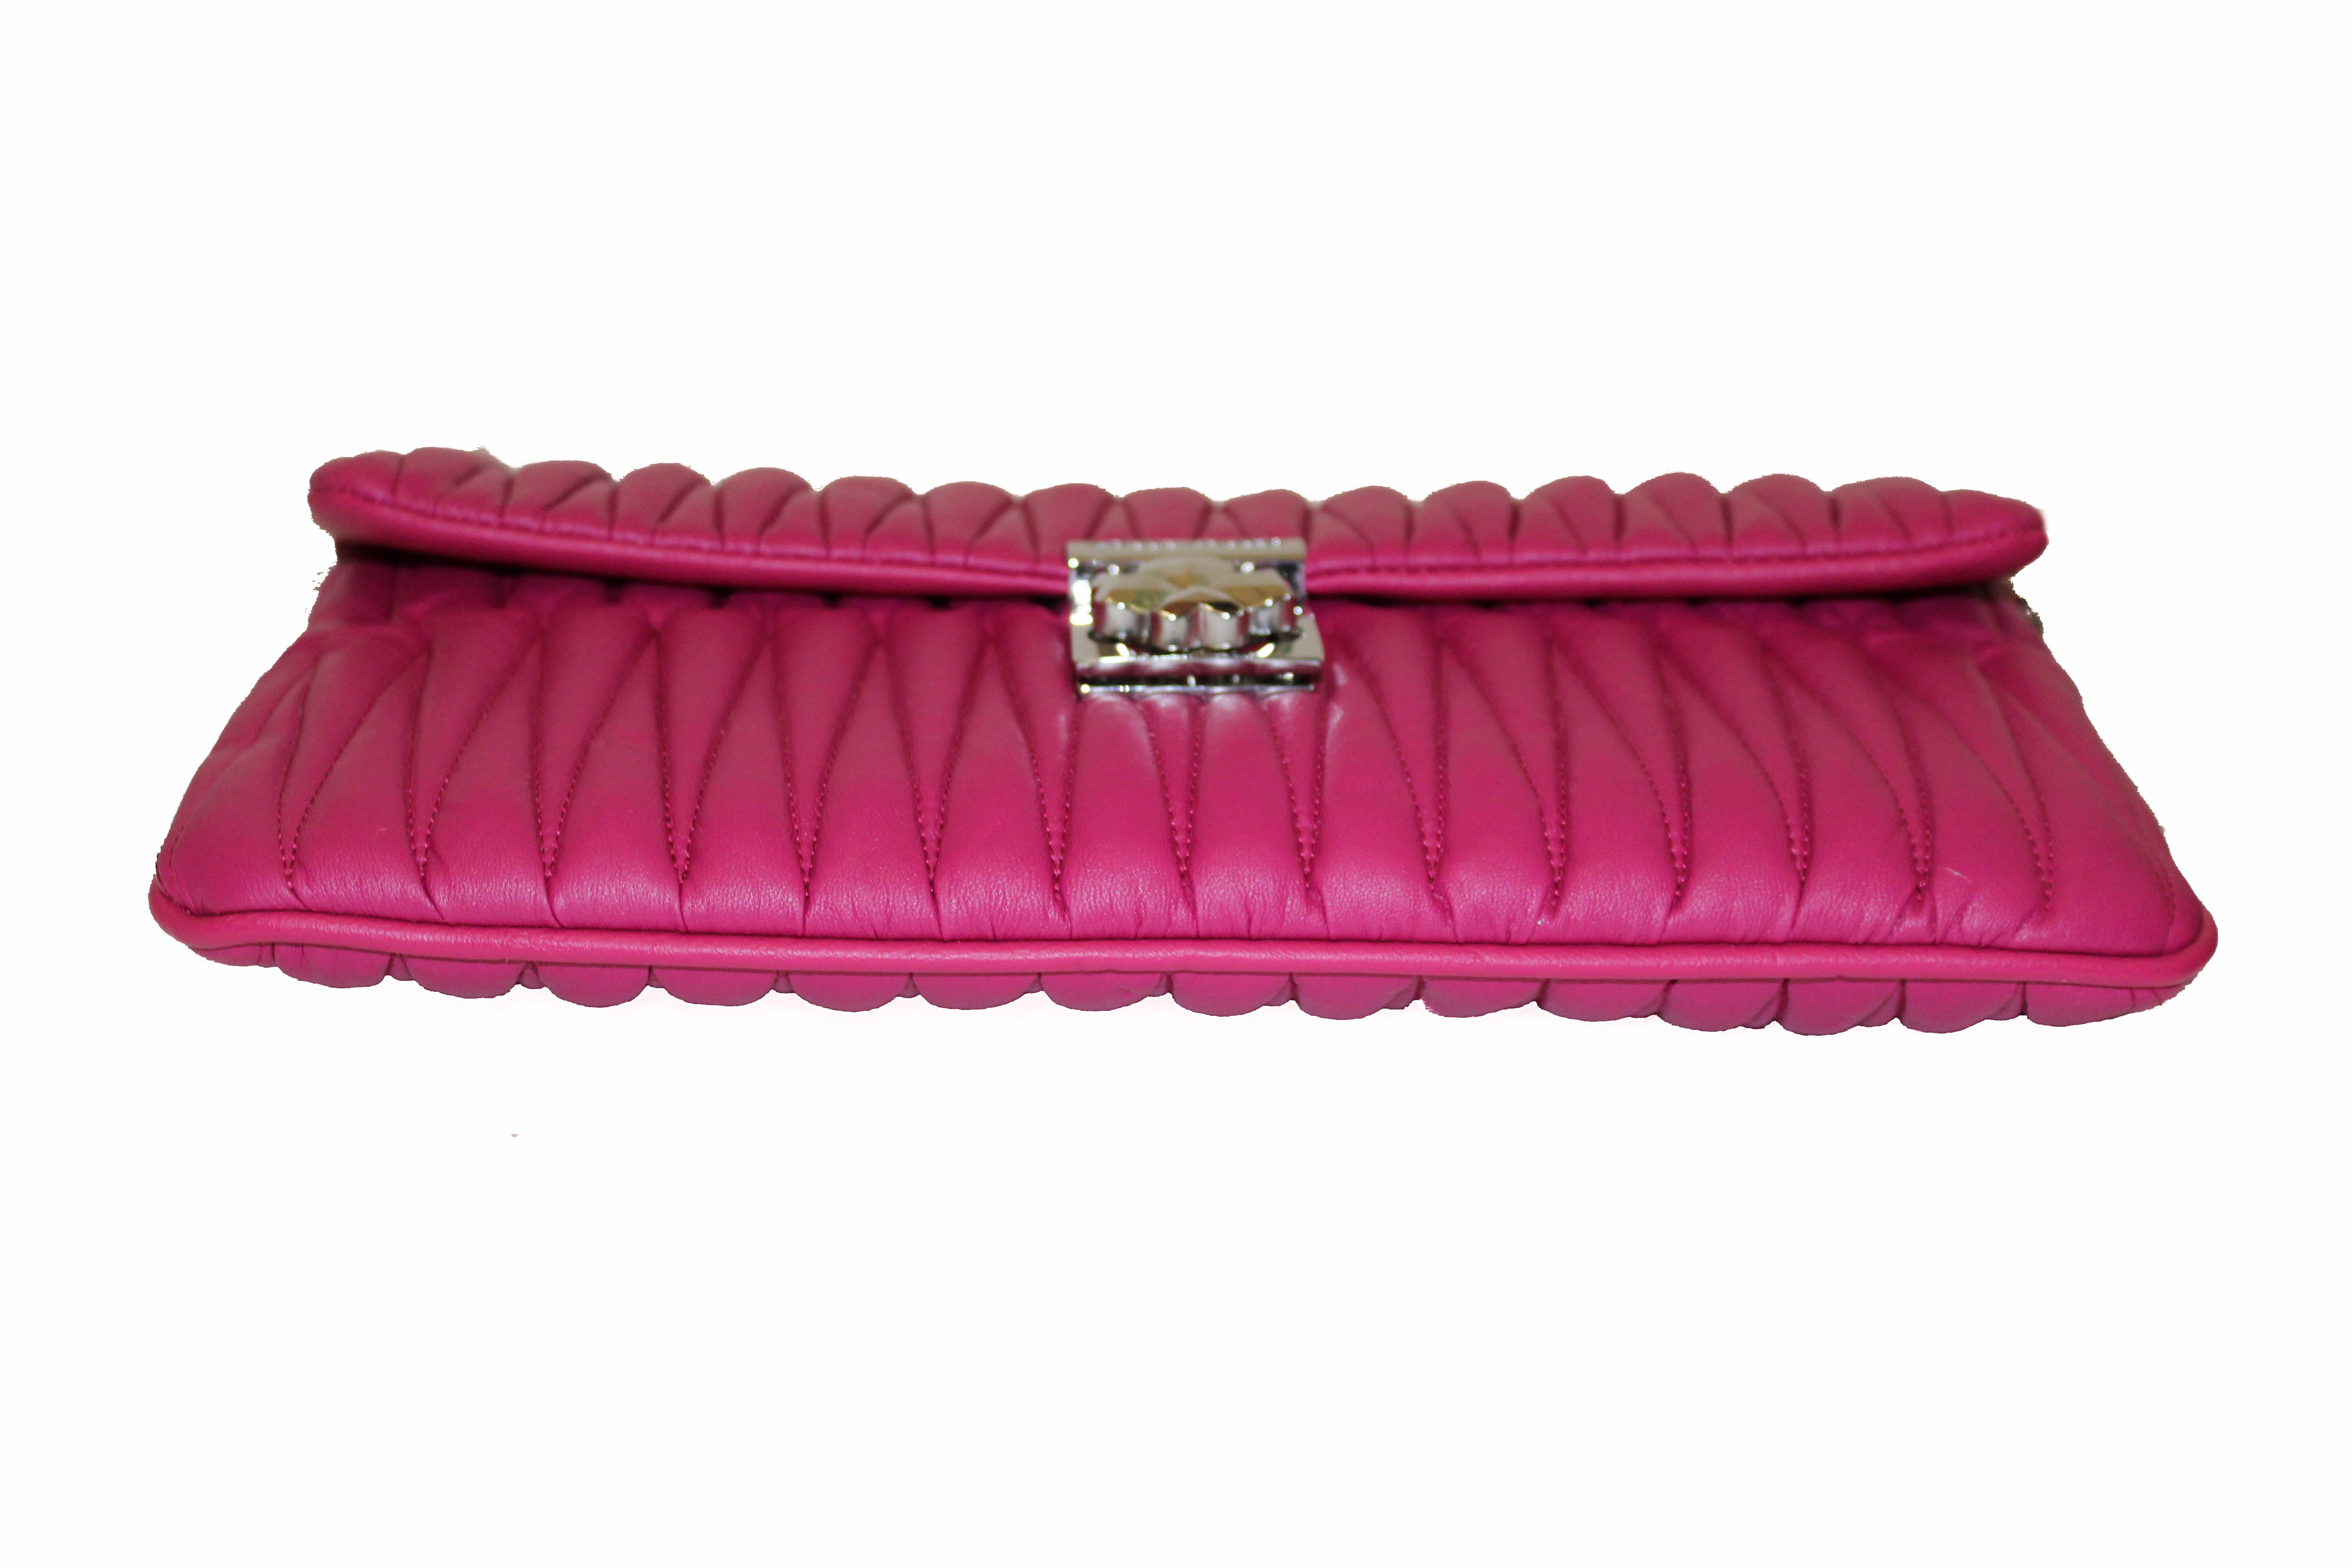 Authentic Folli Follie Magenta Quilted Leather Clutch/Crossbody Bag